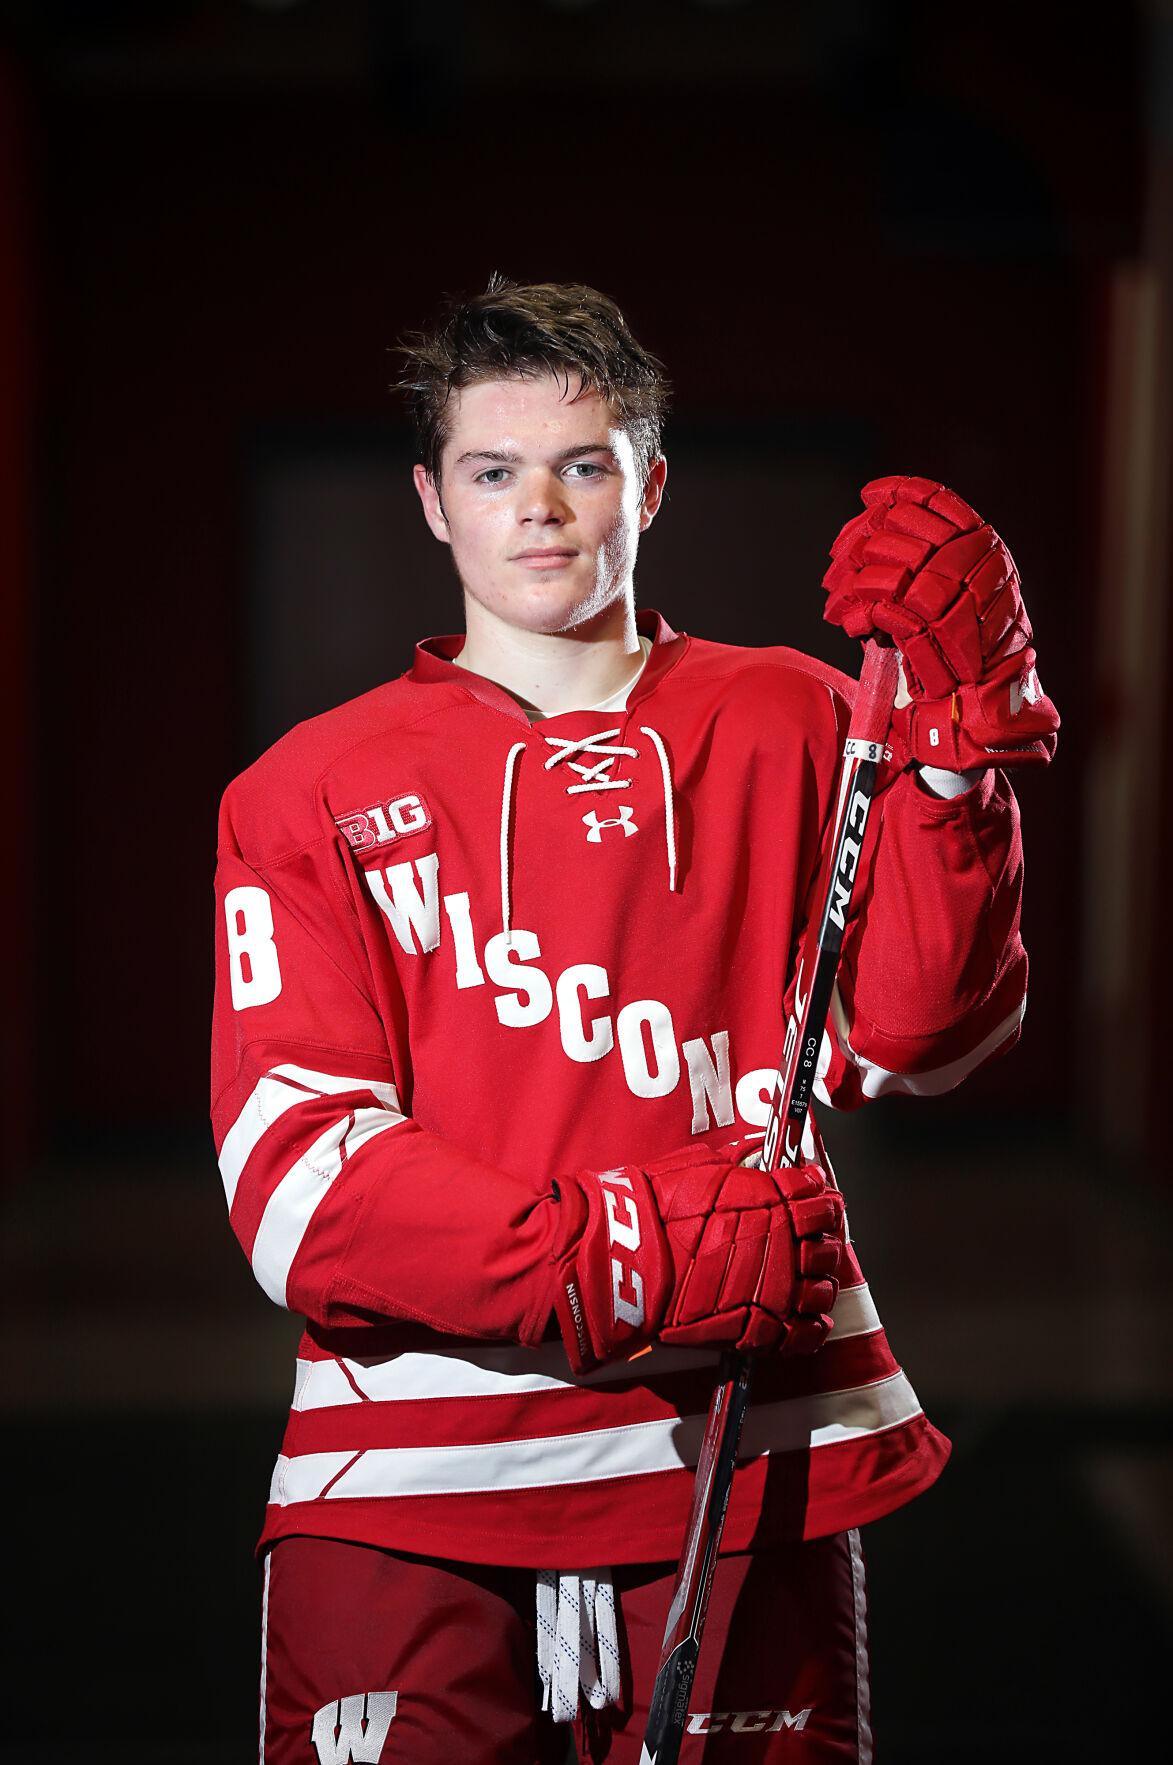 The Hockey Guys' TikTok account created by Wisconsin college athletes